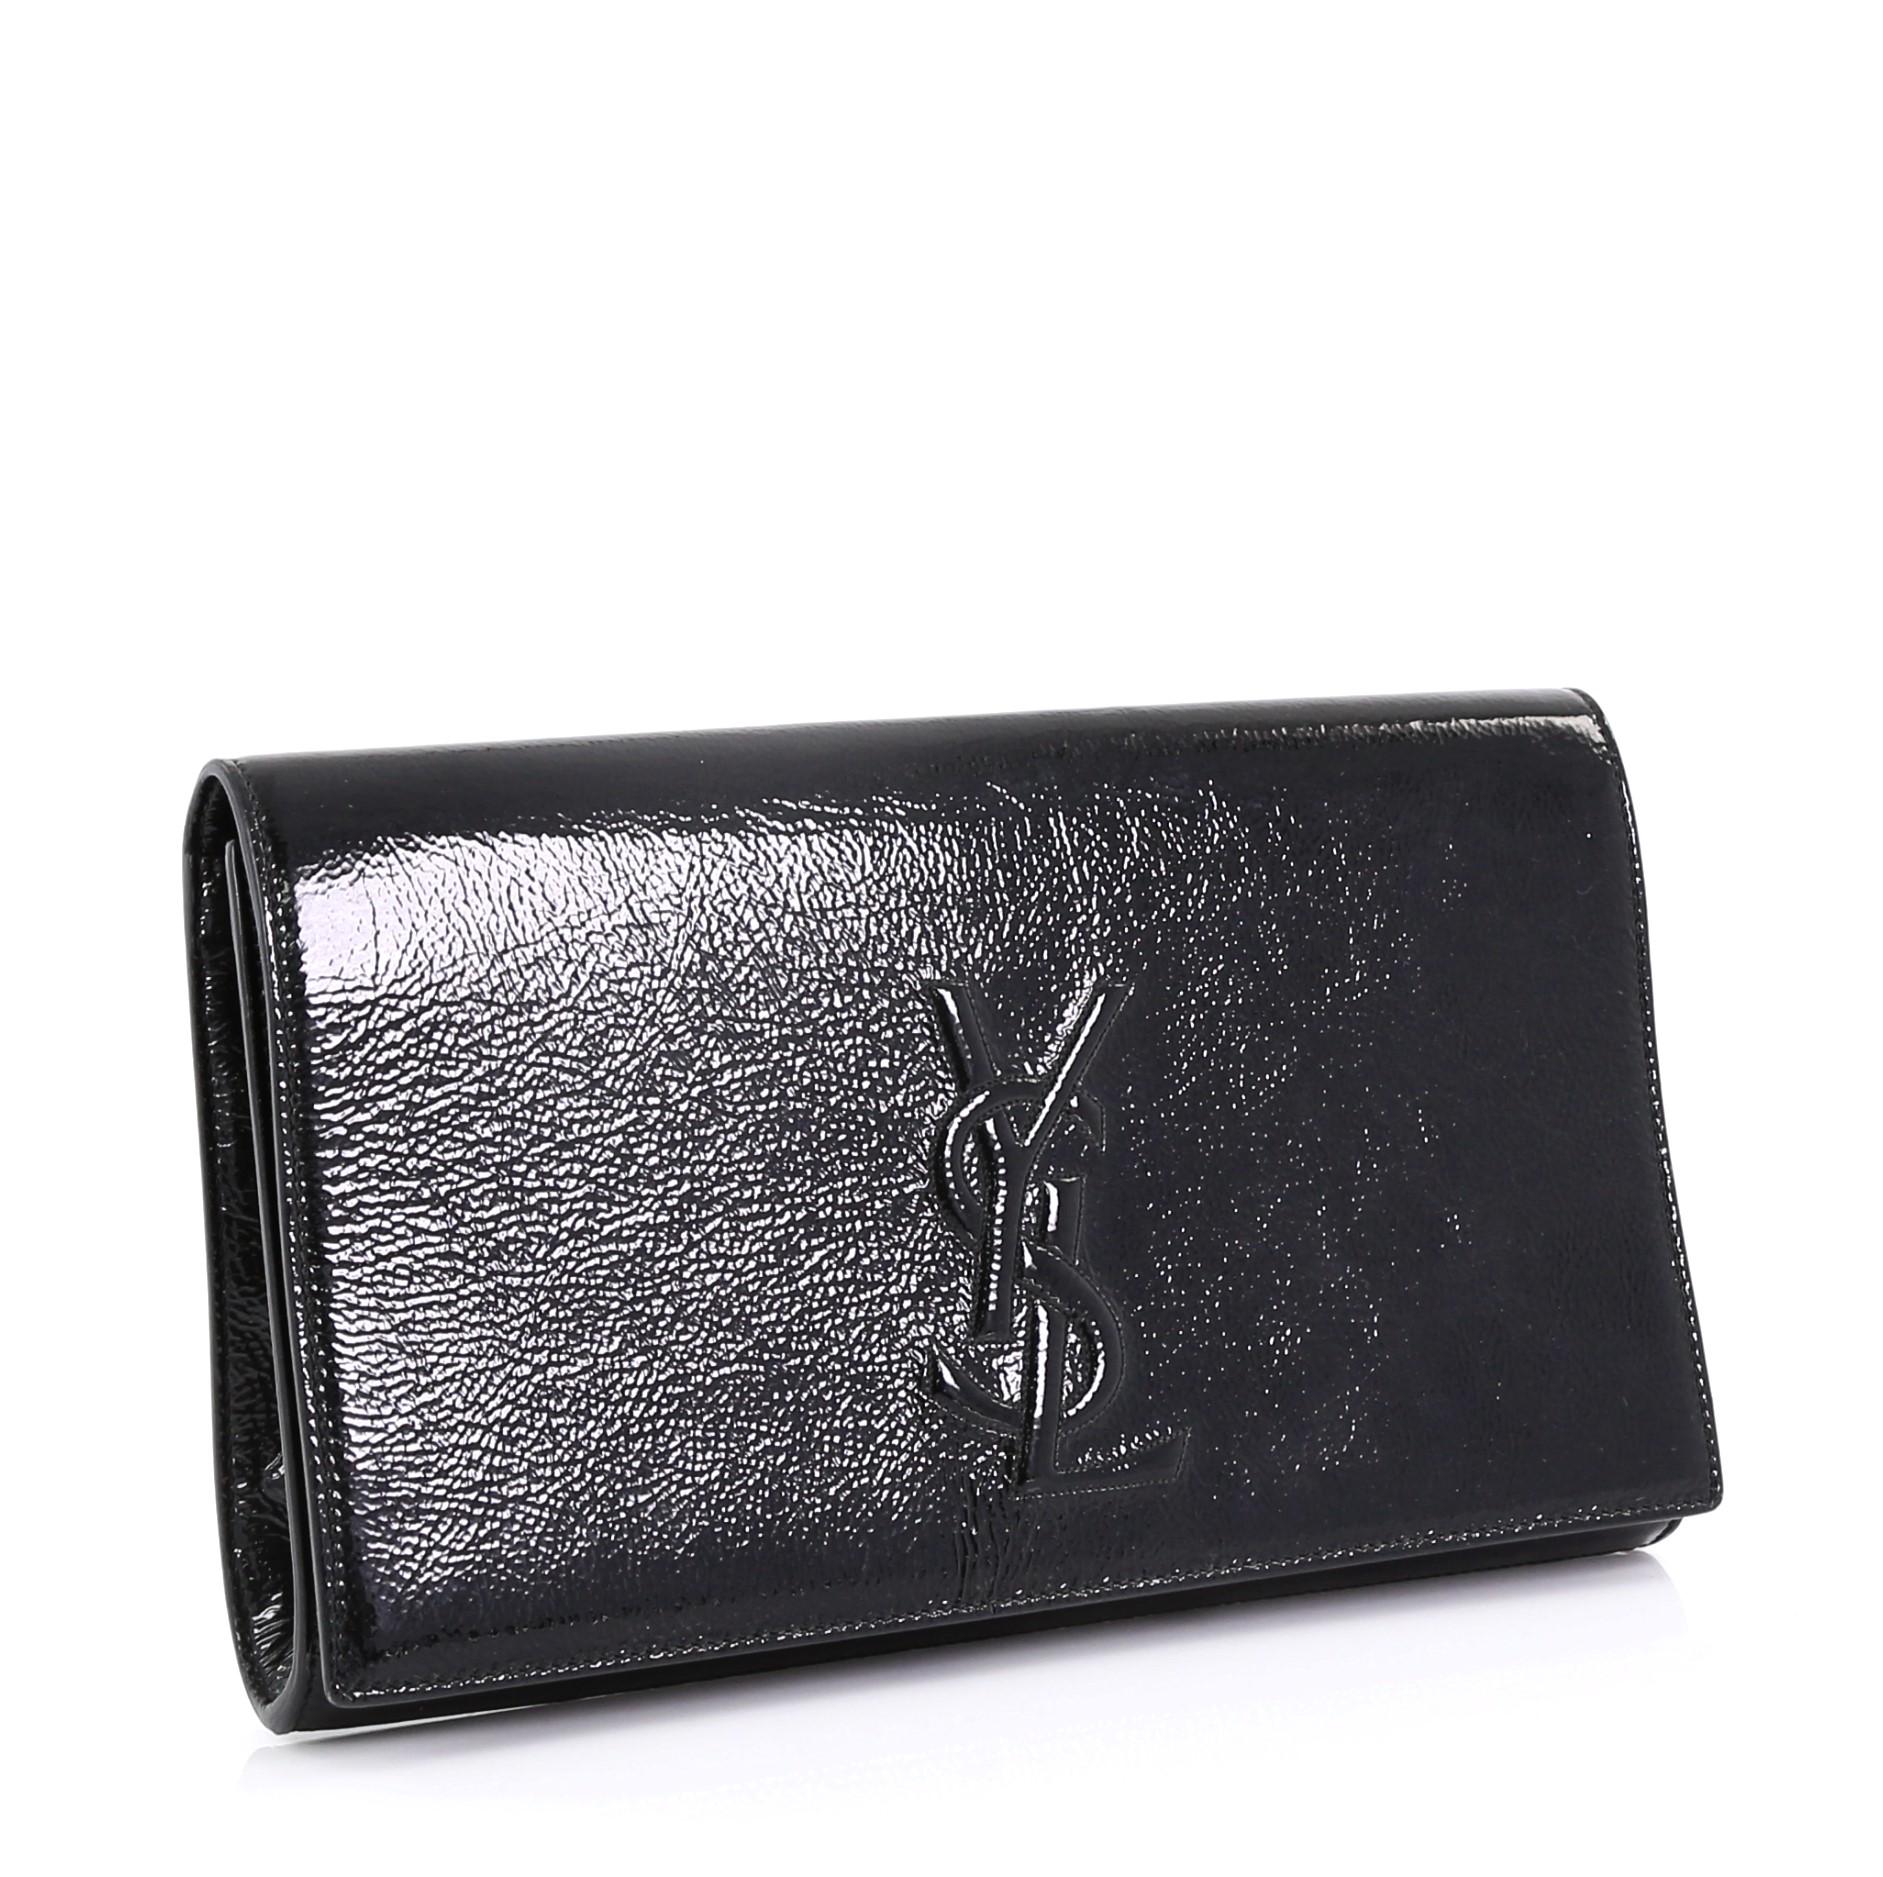 This Saint Laurent Belle de Jour Clutch Leather Small, crafted in black crinkled patent leather, features an embossed YSL monogram logo and gold-tone hardware. Its magnetic snap closure opens to a black satin interior with slip pocket. 

Estimated